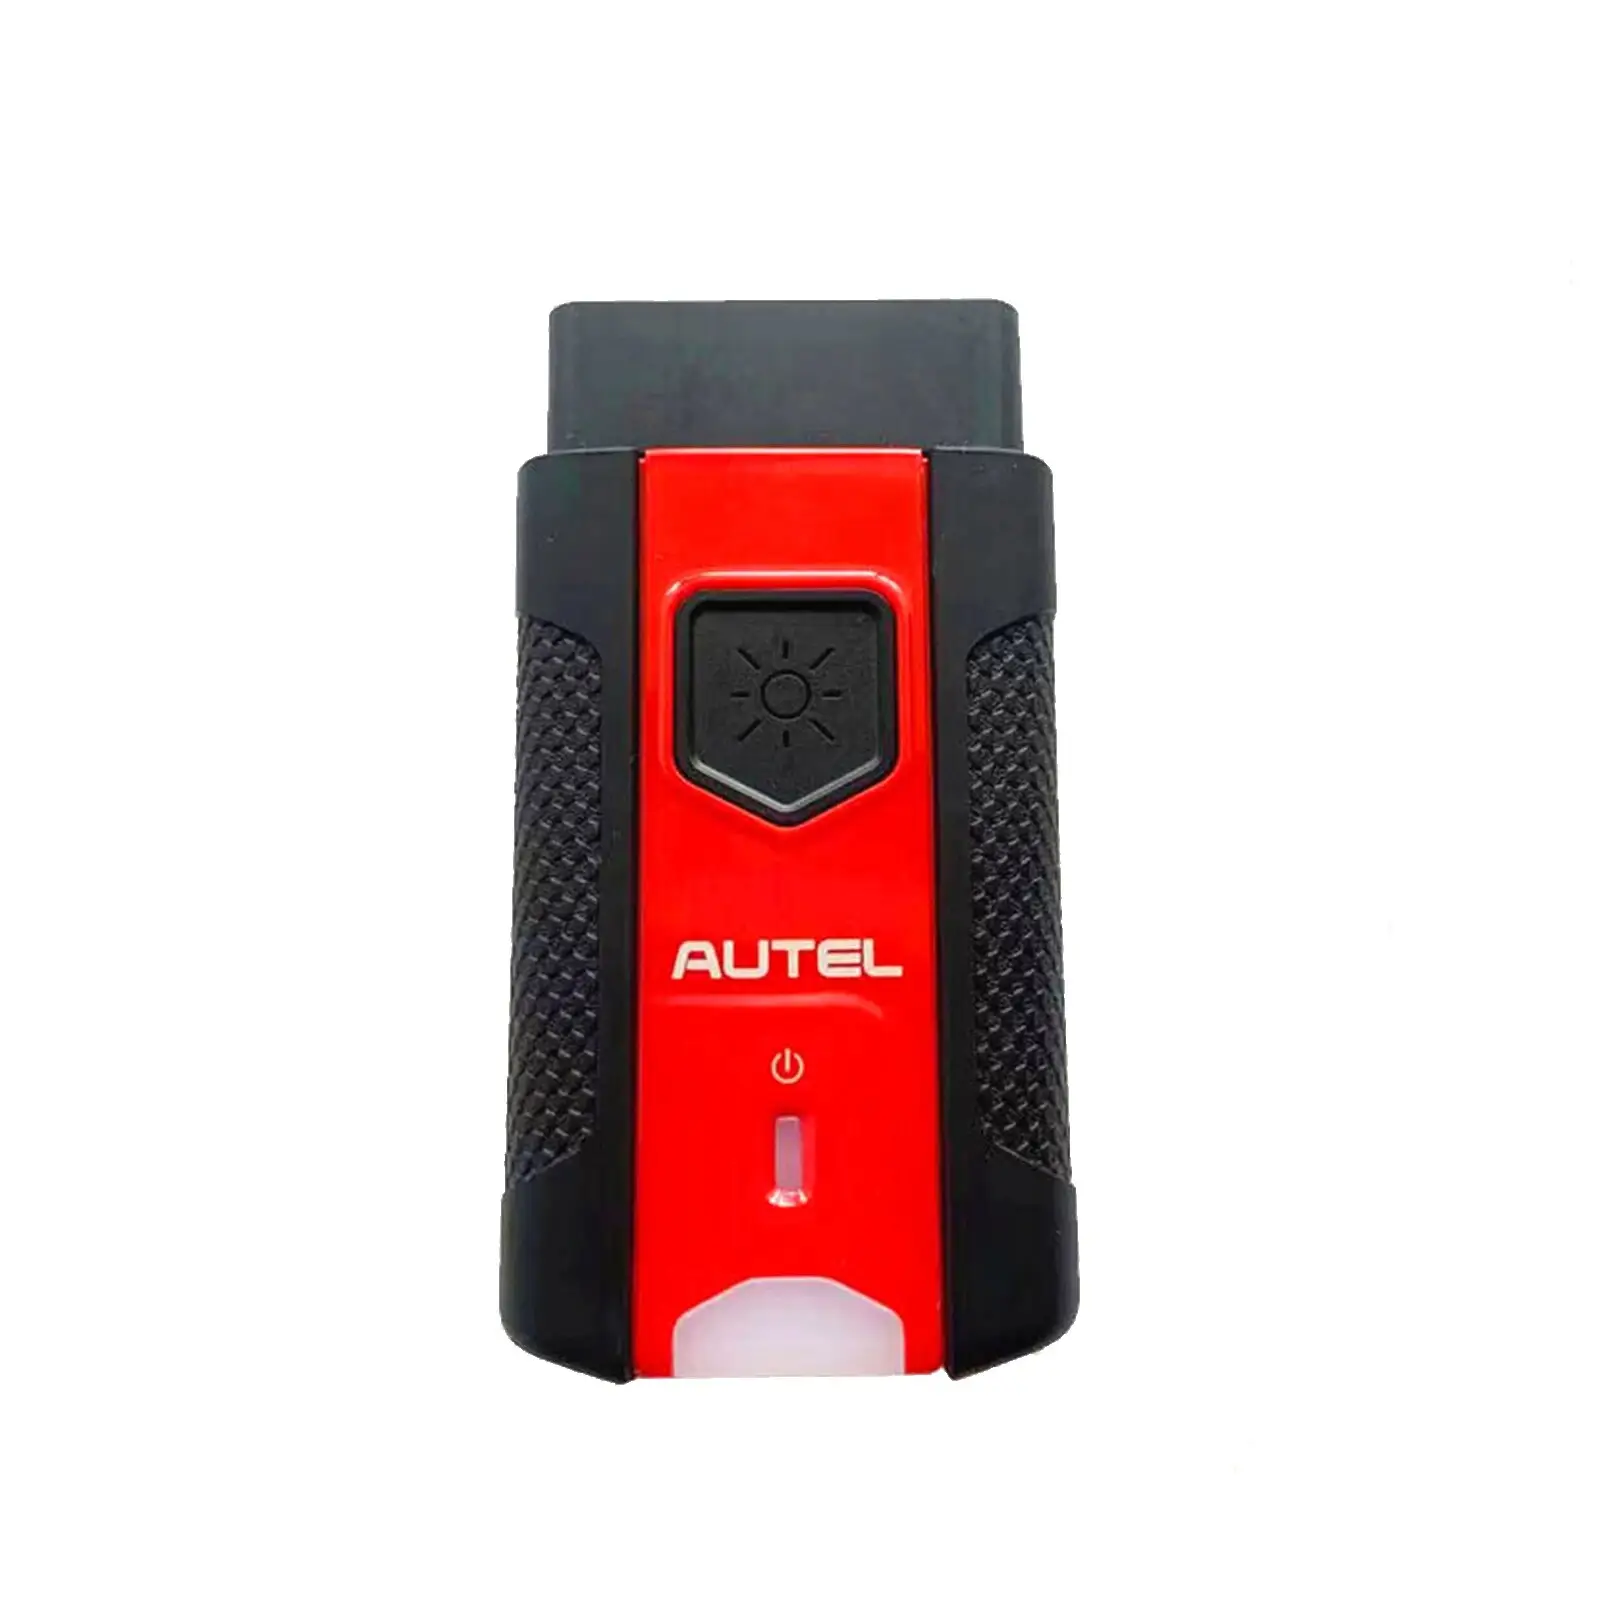 Autel MaxiVCI V200 VCI Compatible with Autel MS906Pro/ MS906Pro-TS/ KM100/ BT609/ BT608/ ITS600 Support DoIP and CanFD